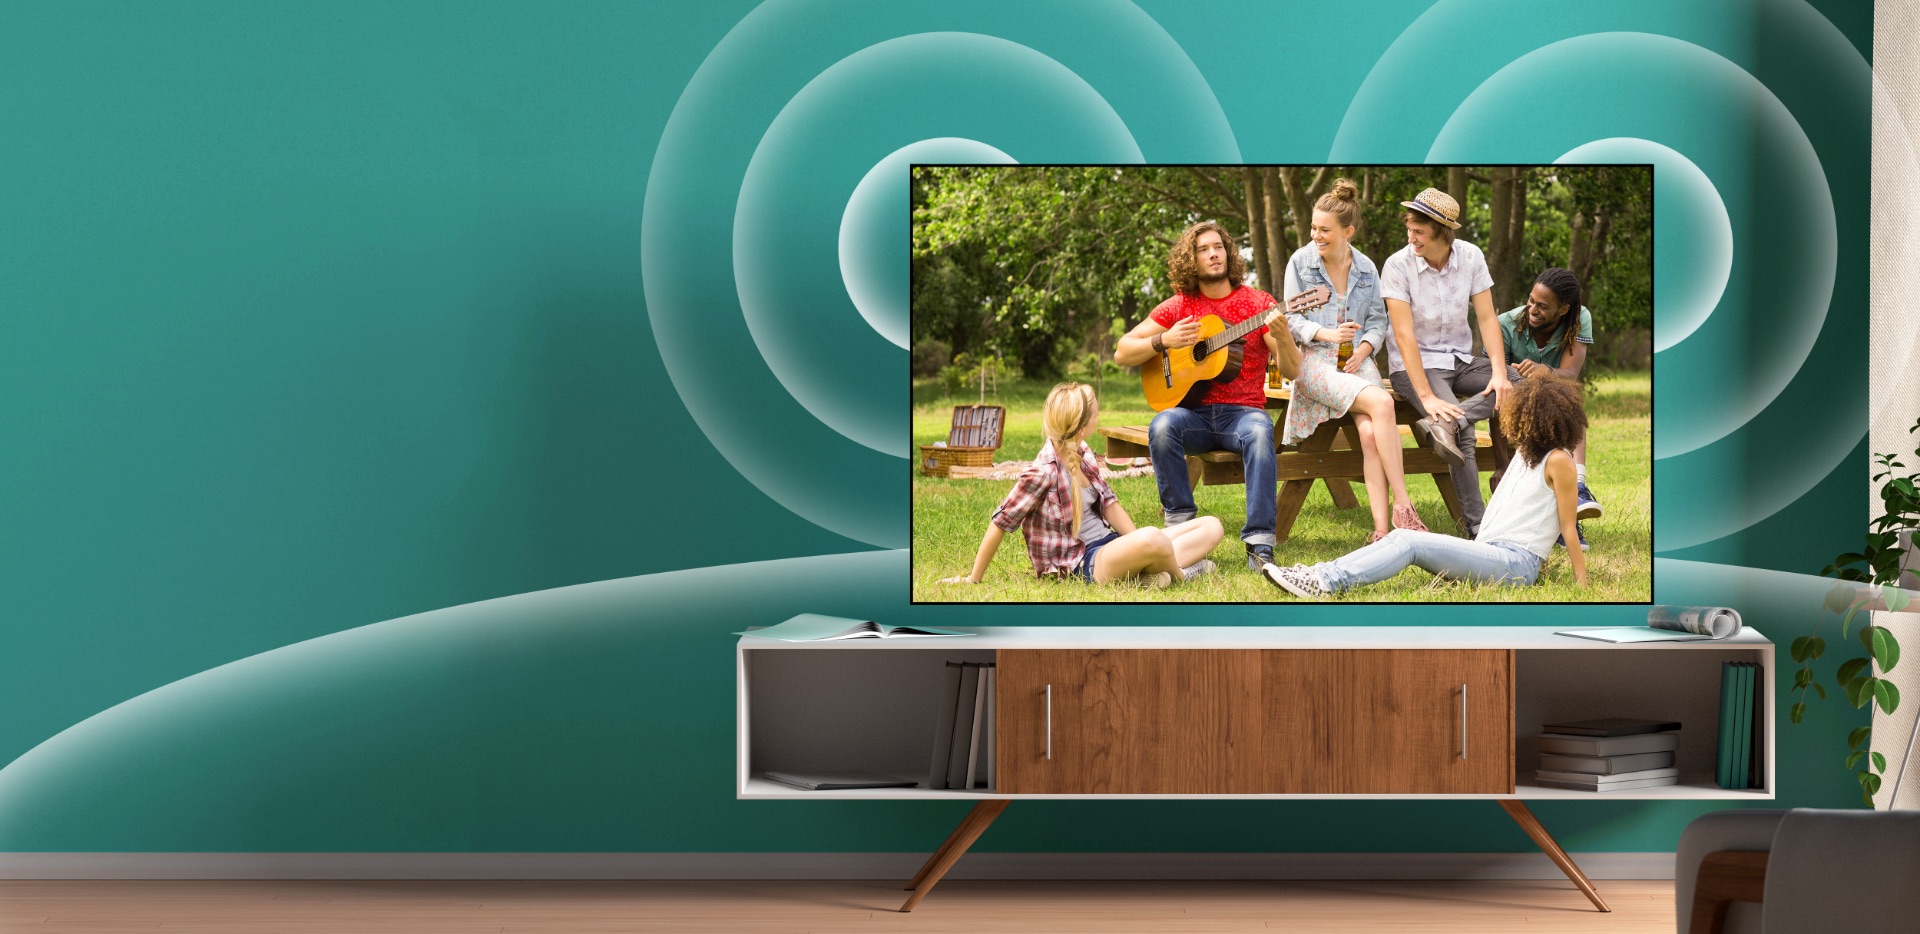 Image highlighting the Dolby Audio technology on the Hisense A4G Series Smart FHD TV, delivering immersive sound quality and realistic surround sound effects.